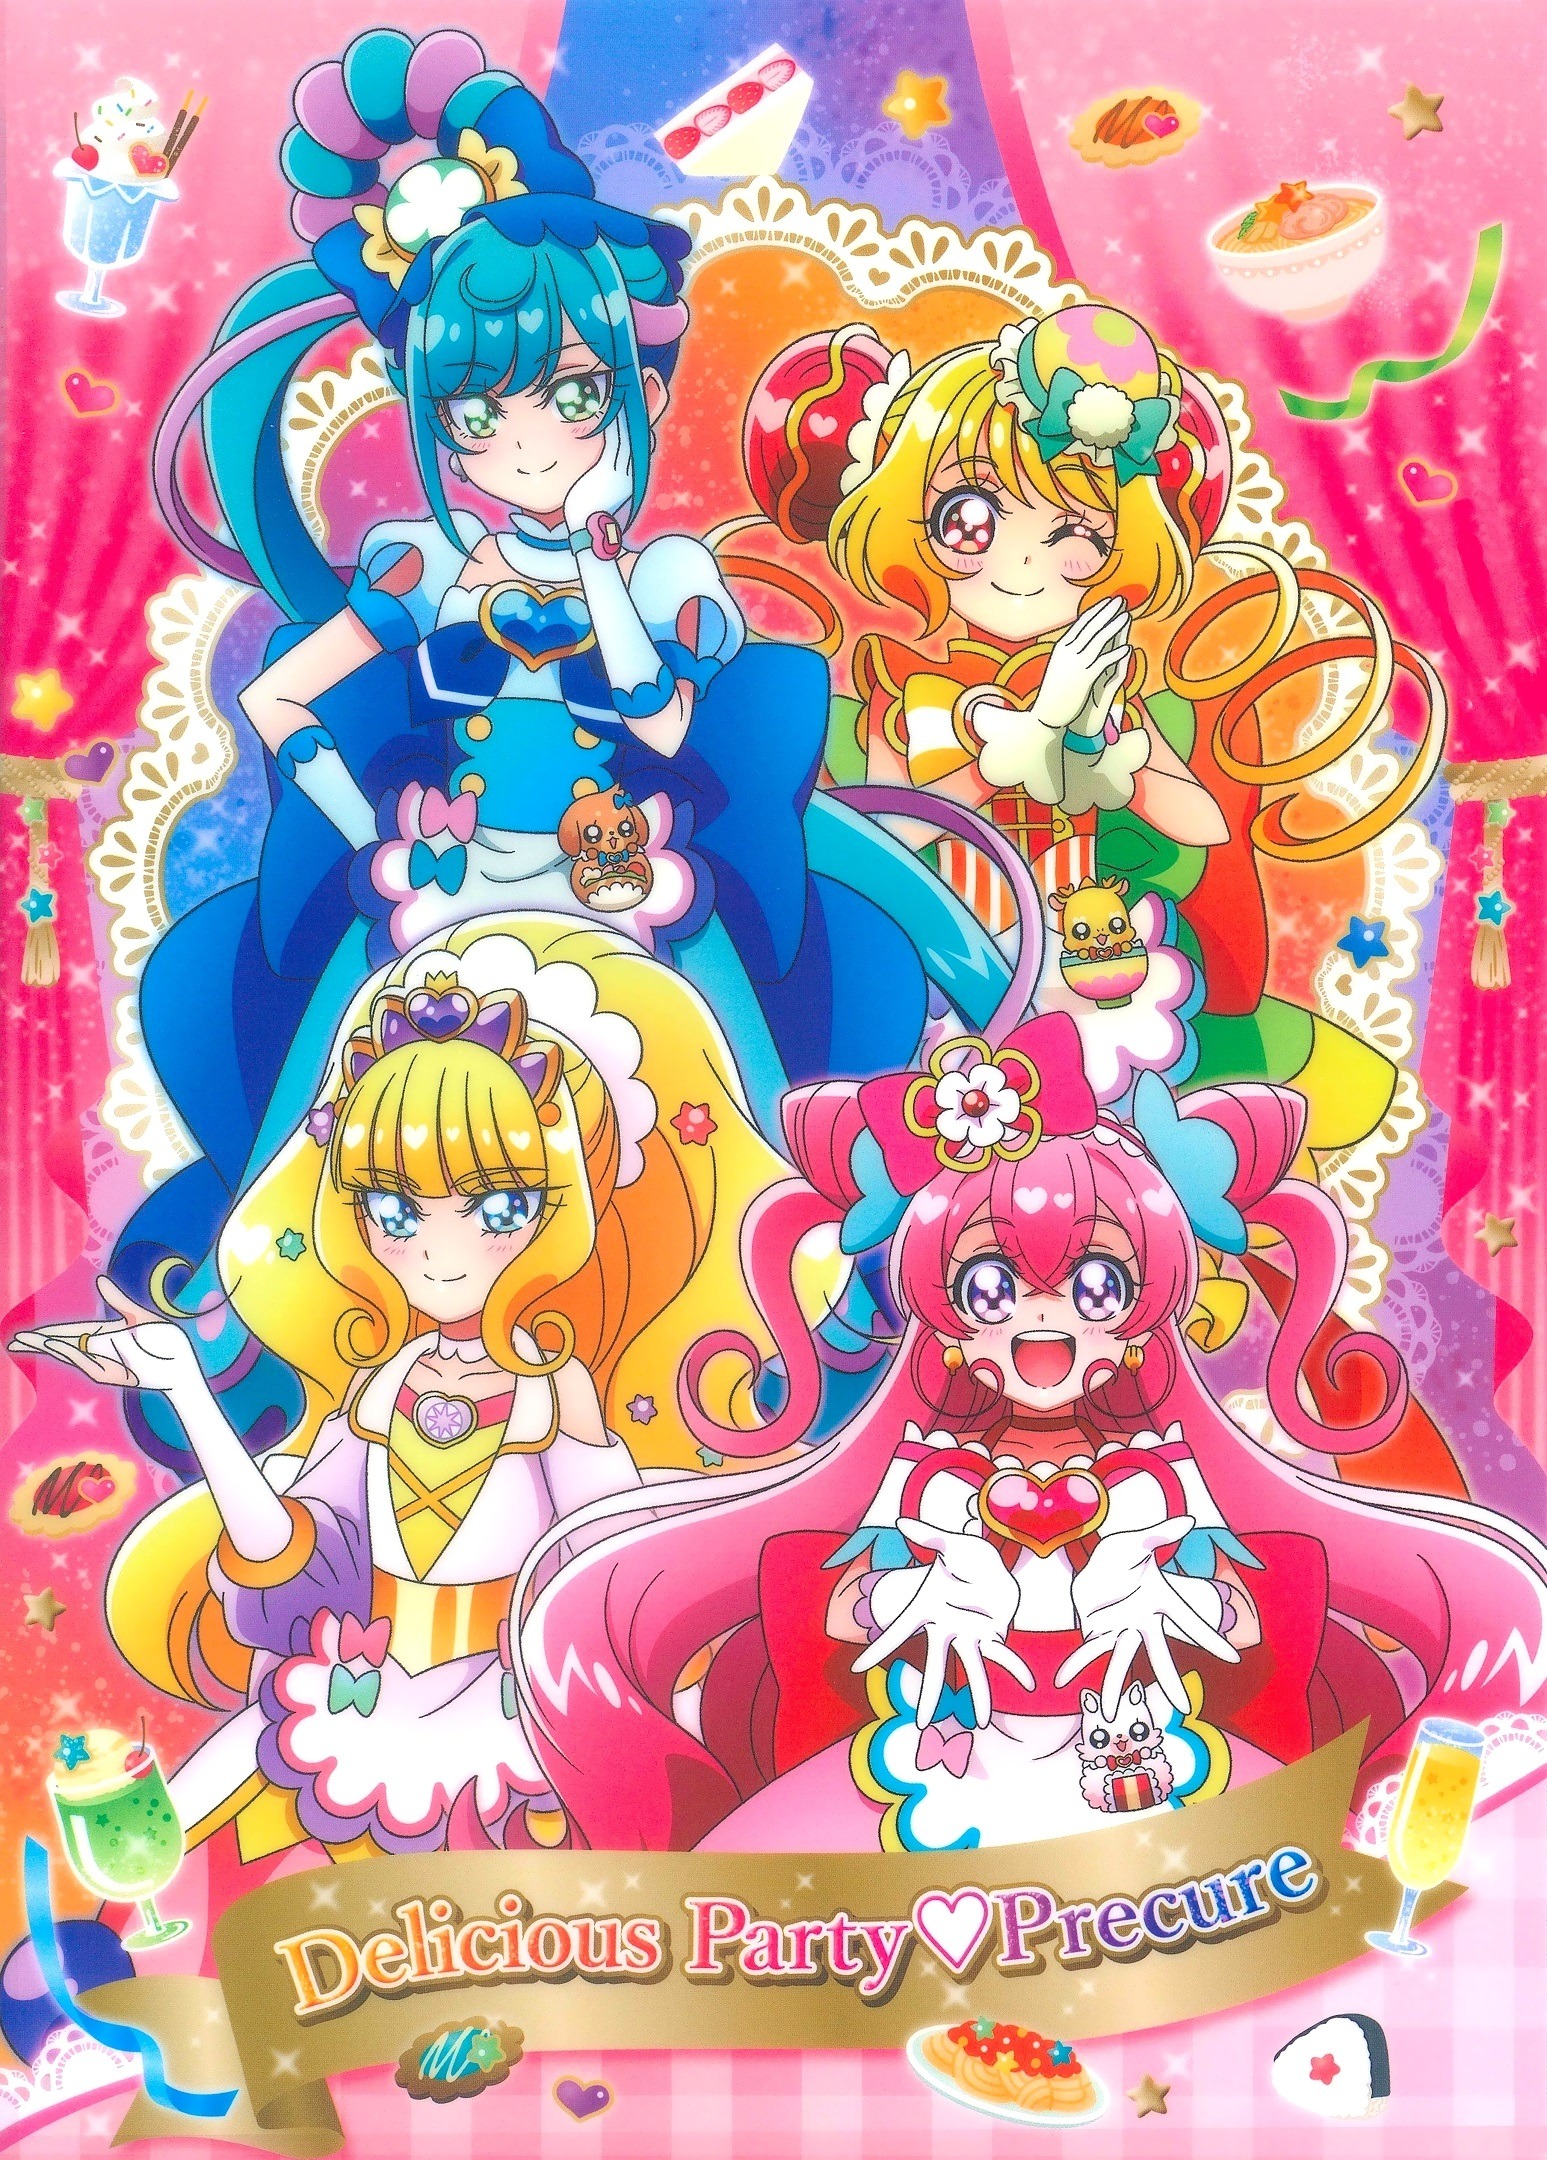 Happiness Charge Pretty Cure!: Episode List